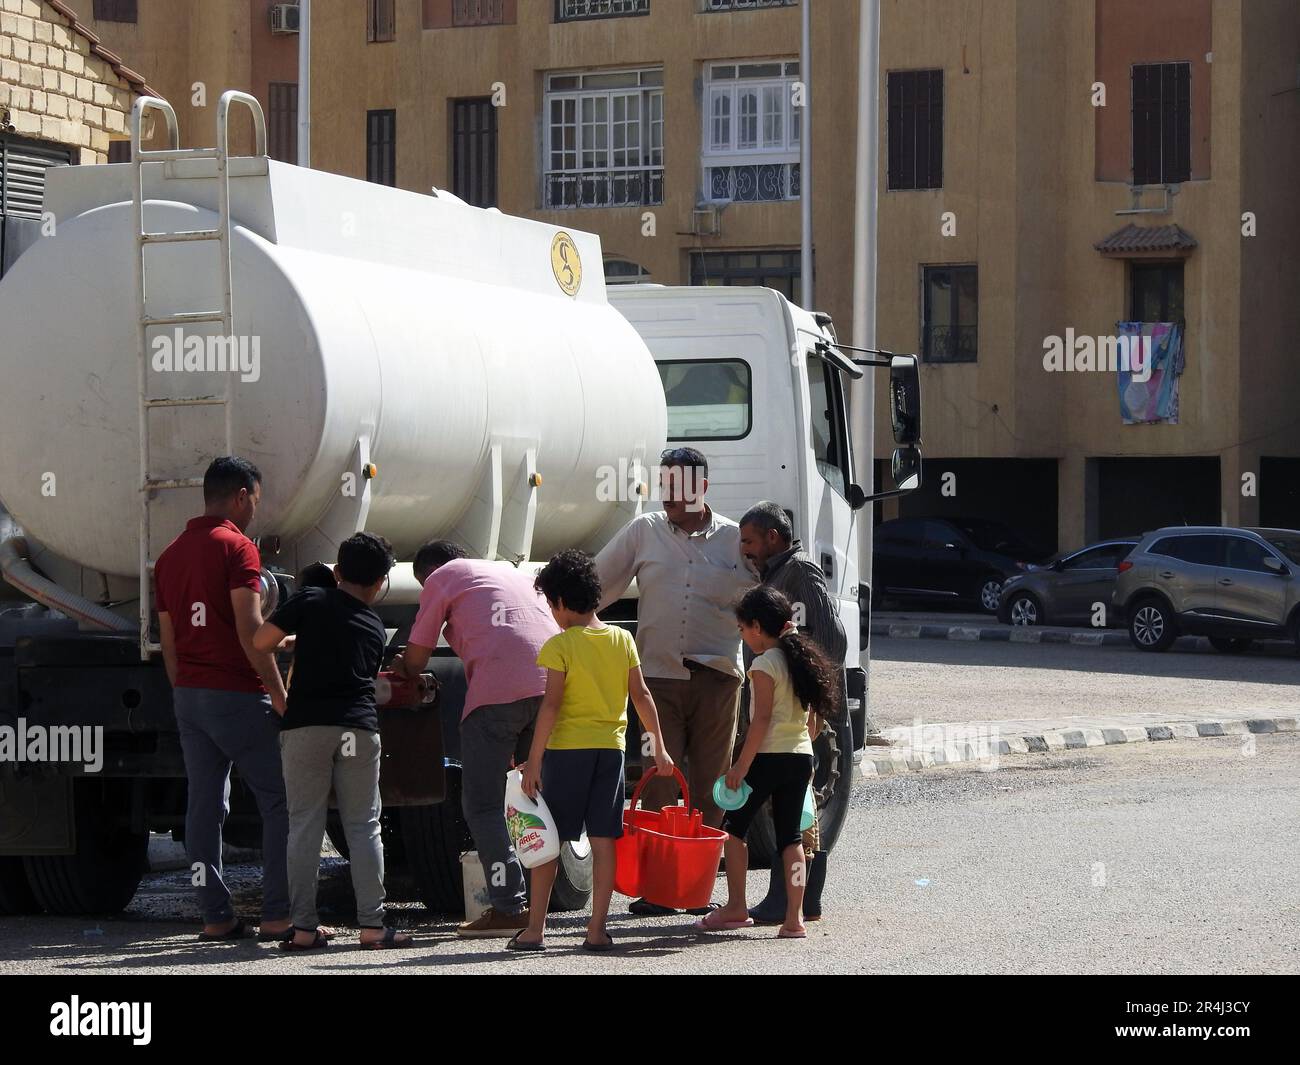 Cairo, Egypt, May 15 2023: A water tanker vehicle with clean water as an emergency service response in any area with water outage to deliver drinking Stock Photo